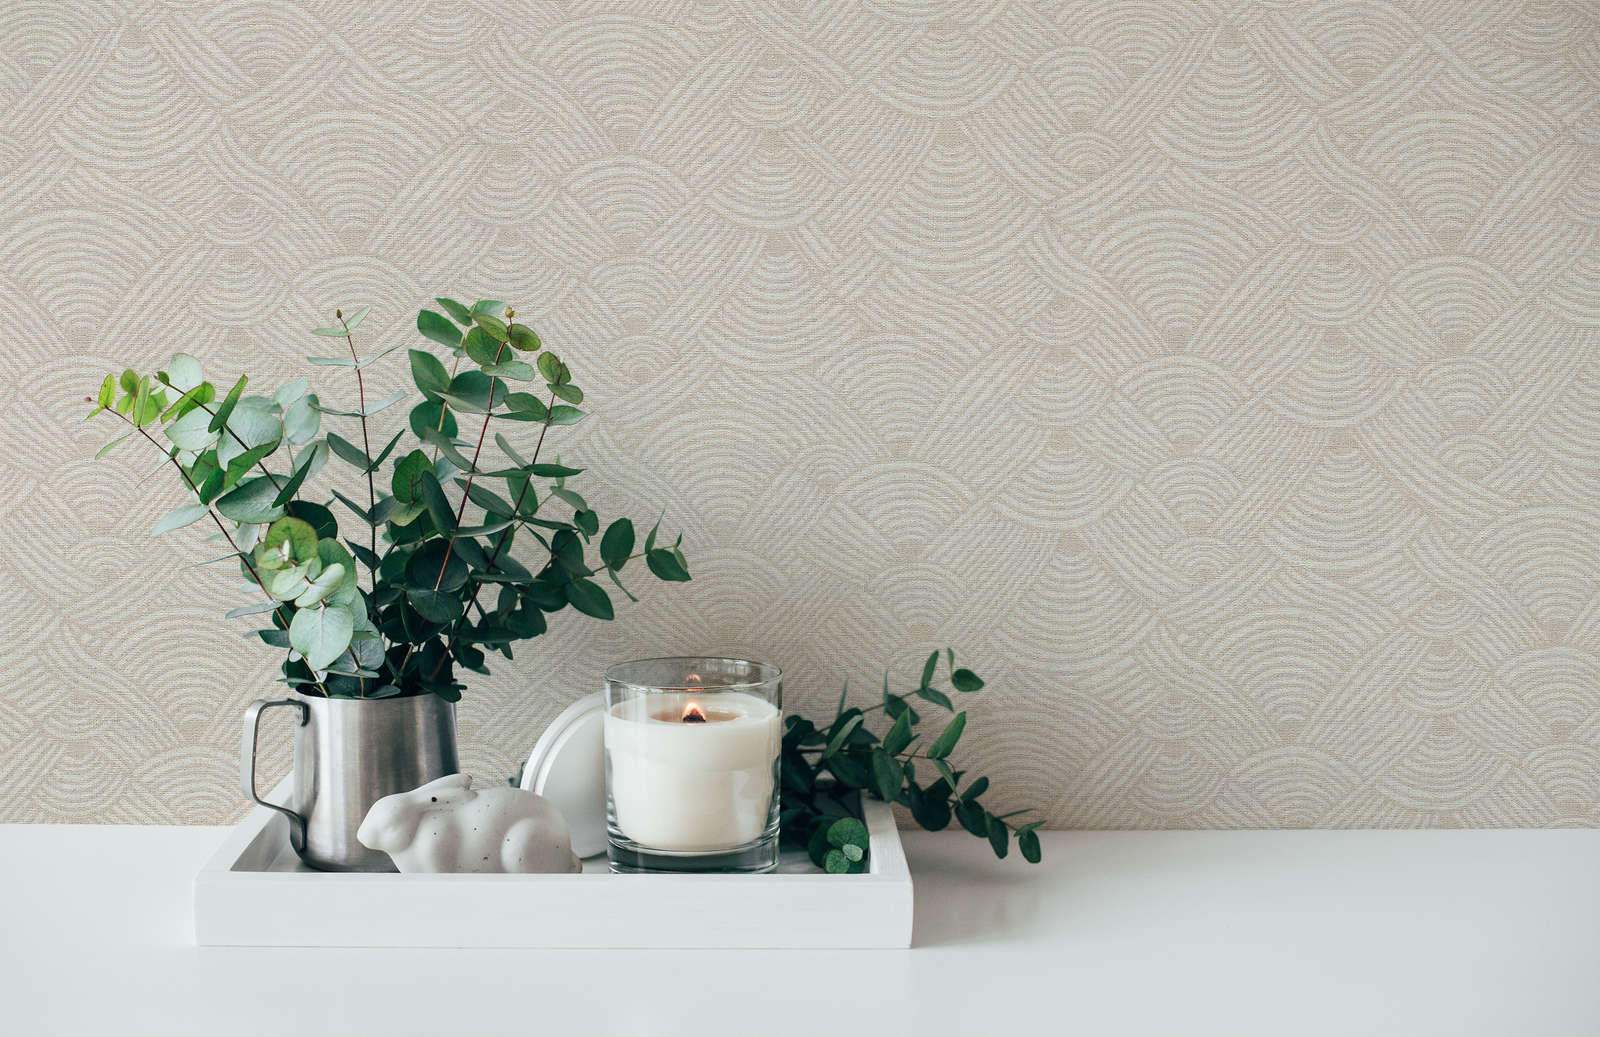             Cream beige wallpaper wave pattern with texture details in ethnic style
        